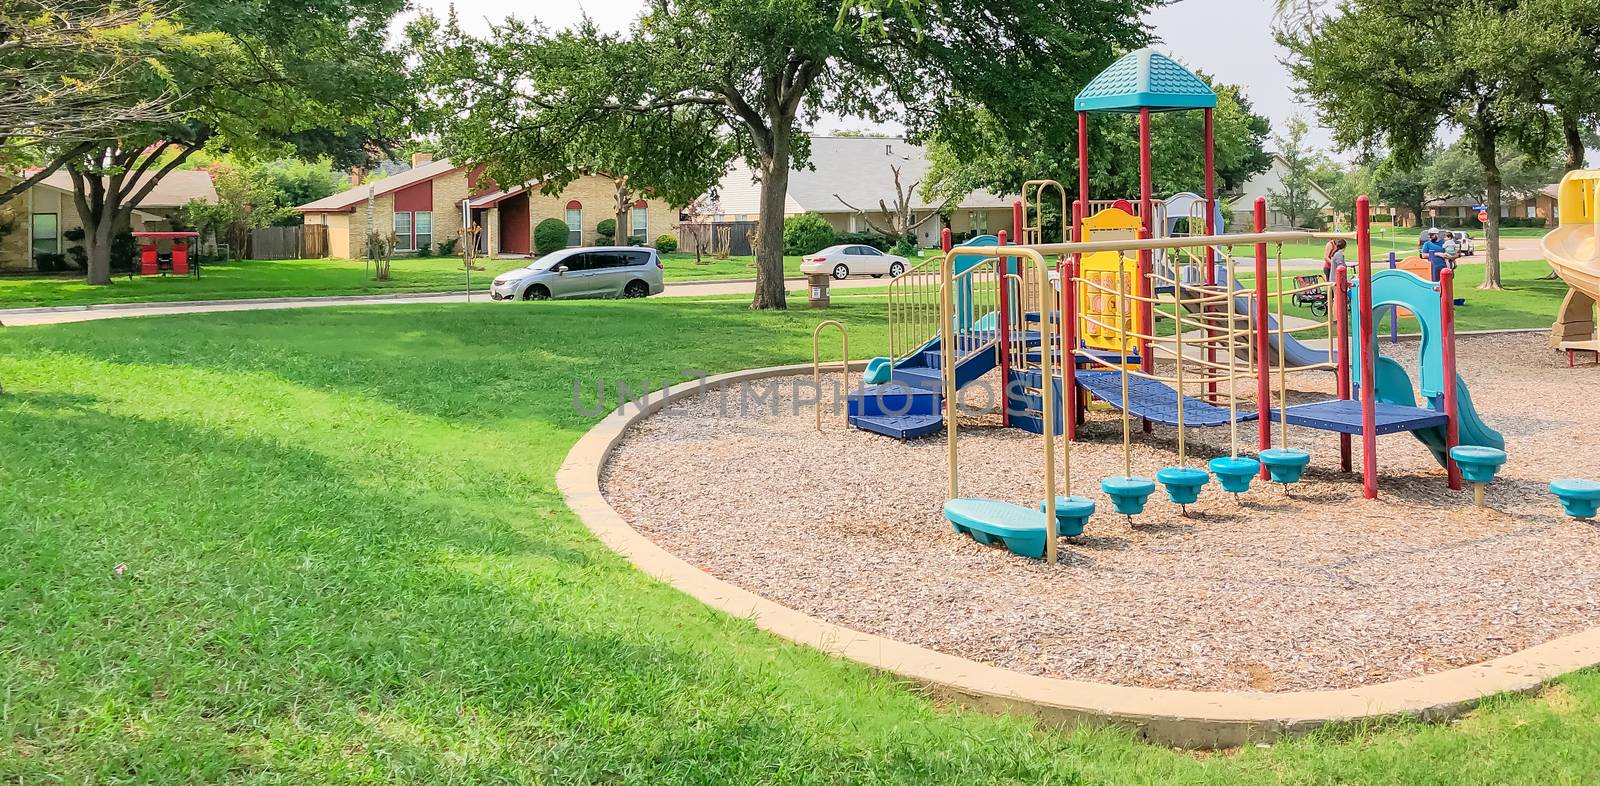 Colorful playground in green park near residential area in Richardson, Texas, USA by trongnguyen